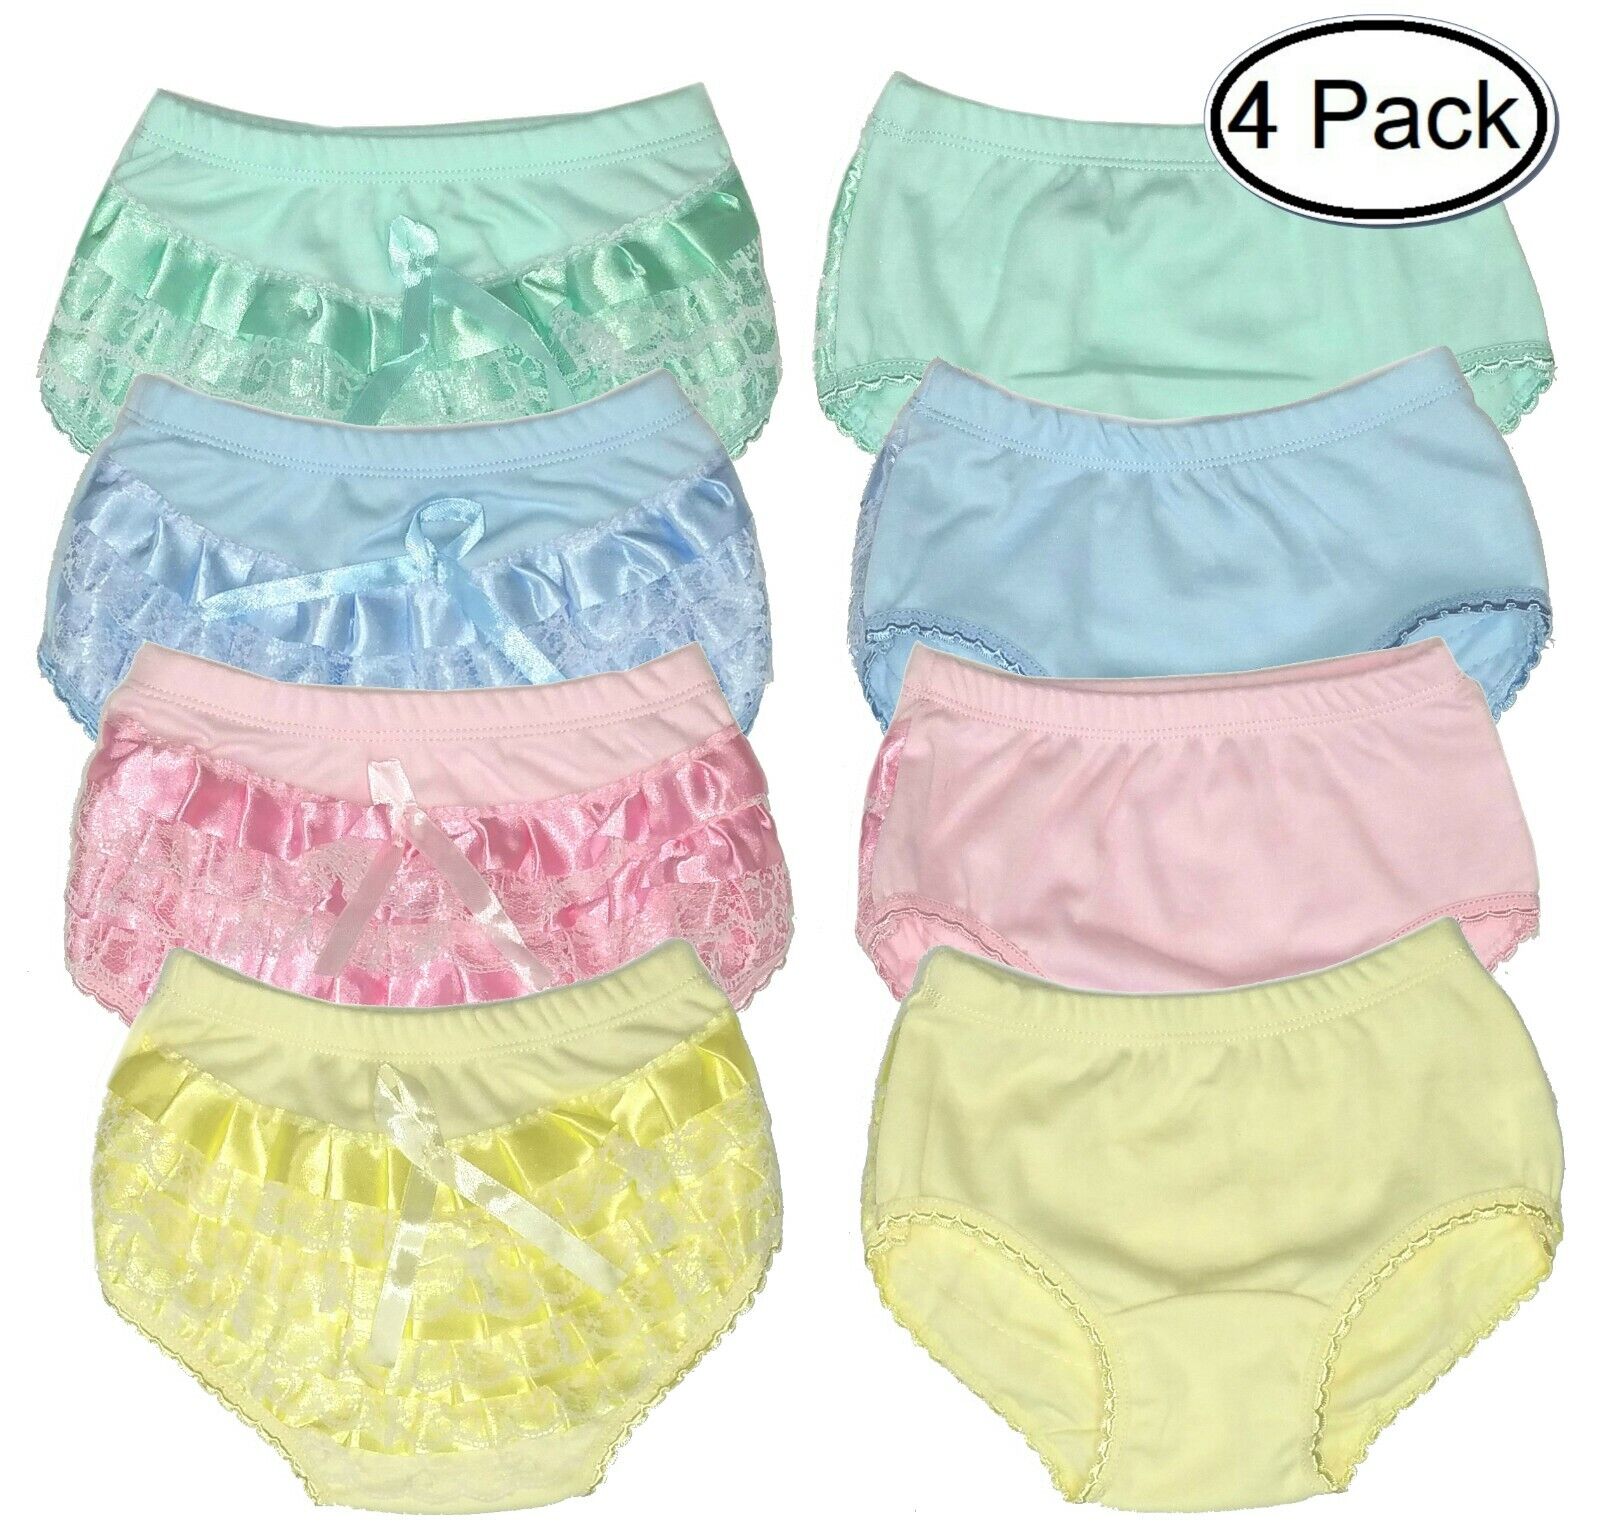 Diaper Cover Baby Bloomers  Cloth Lace Ruffle Toddler Girls Panties 4-Pack Rumba